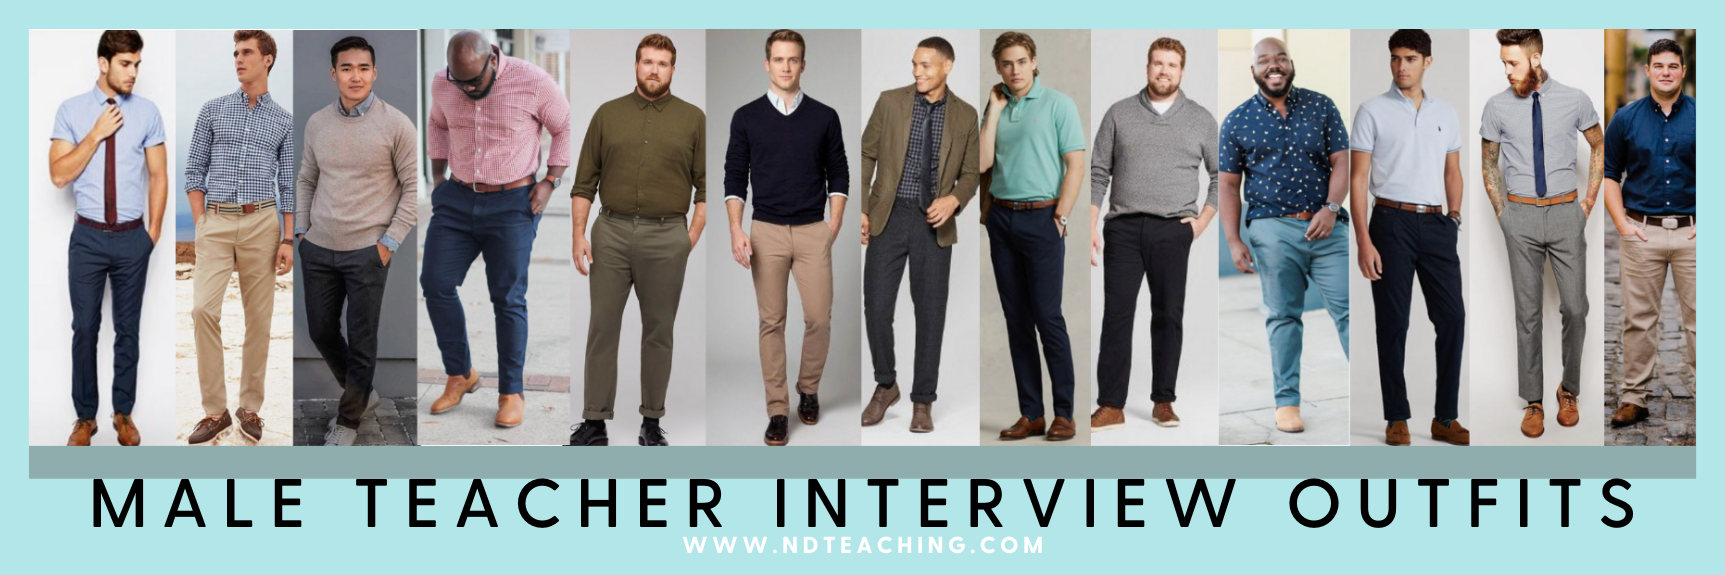 What to Wear for a Job Interview - InterviewSchool